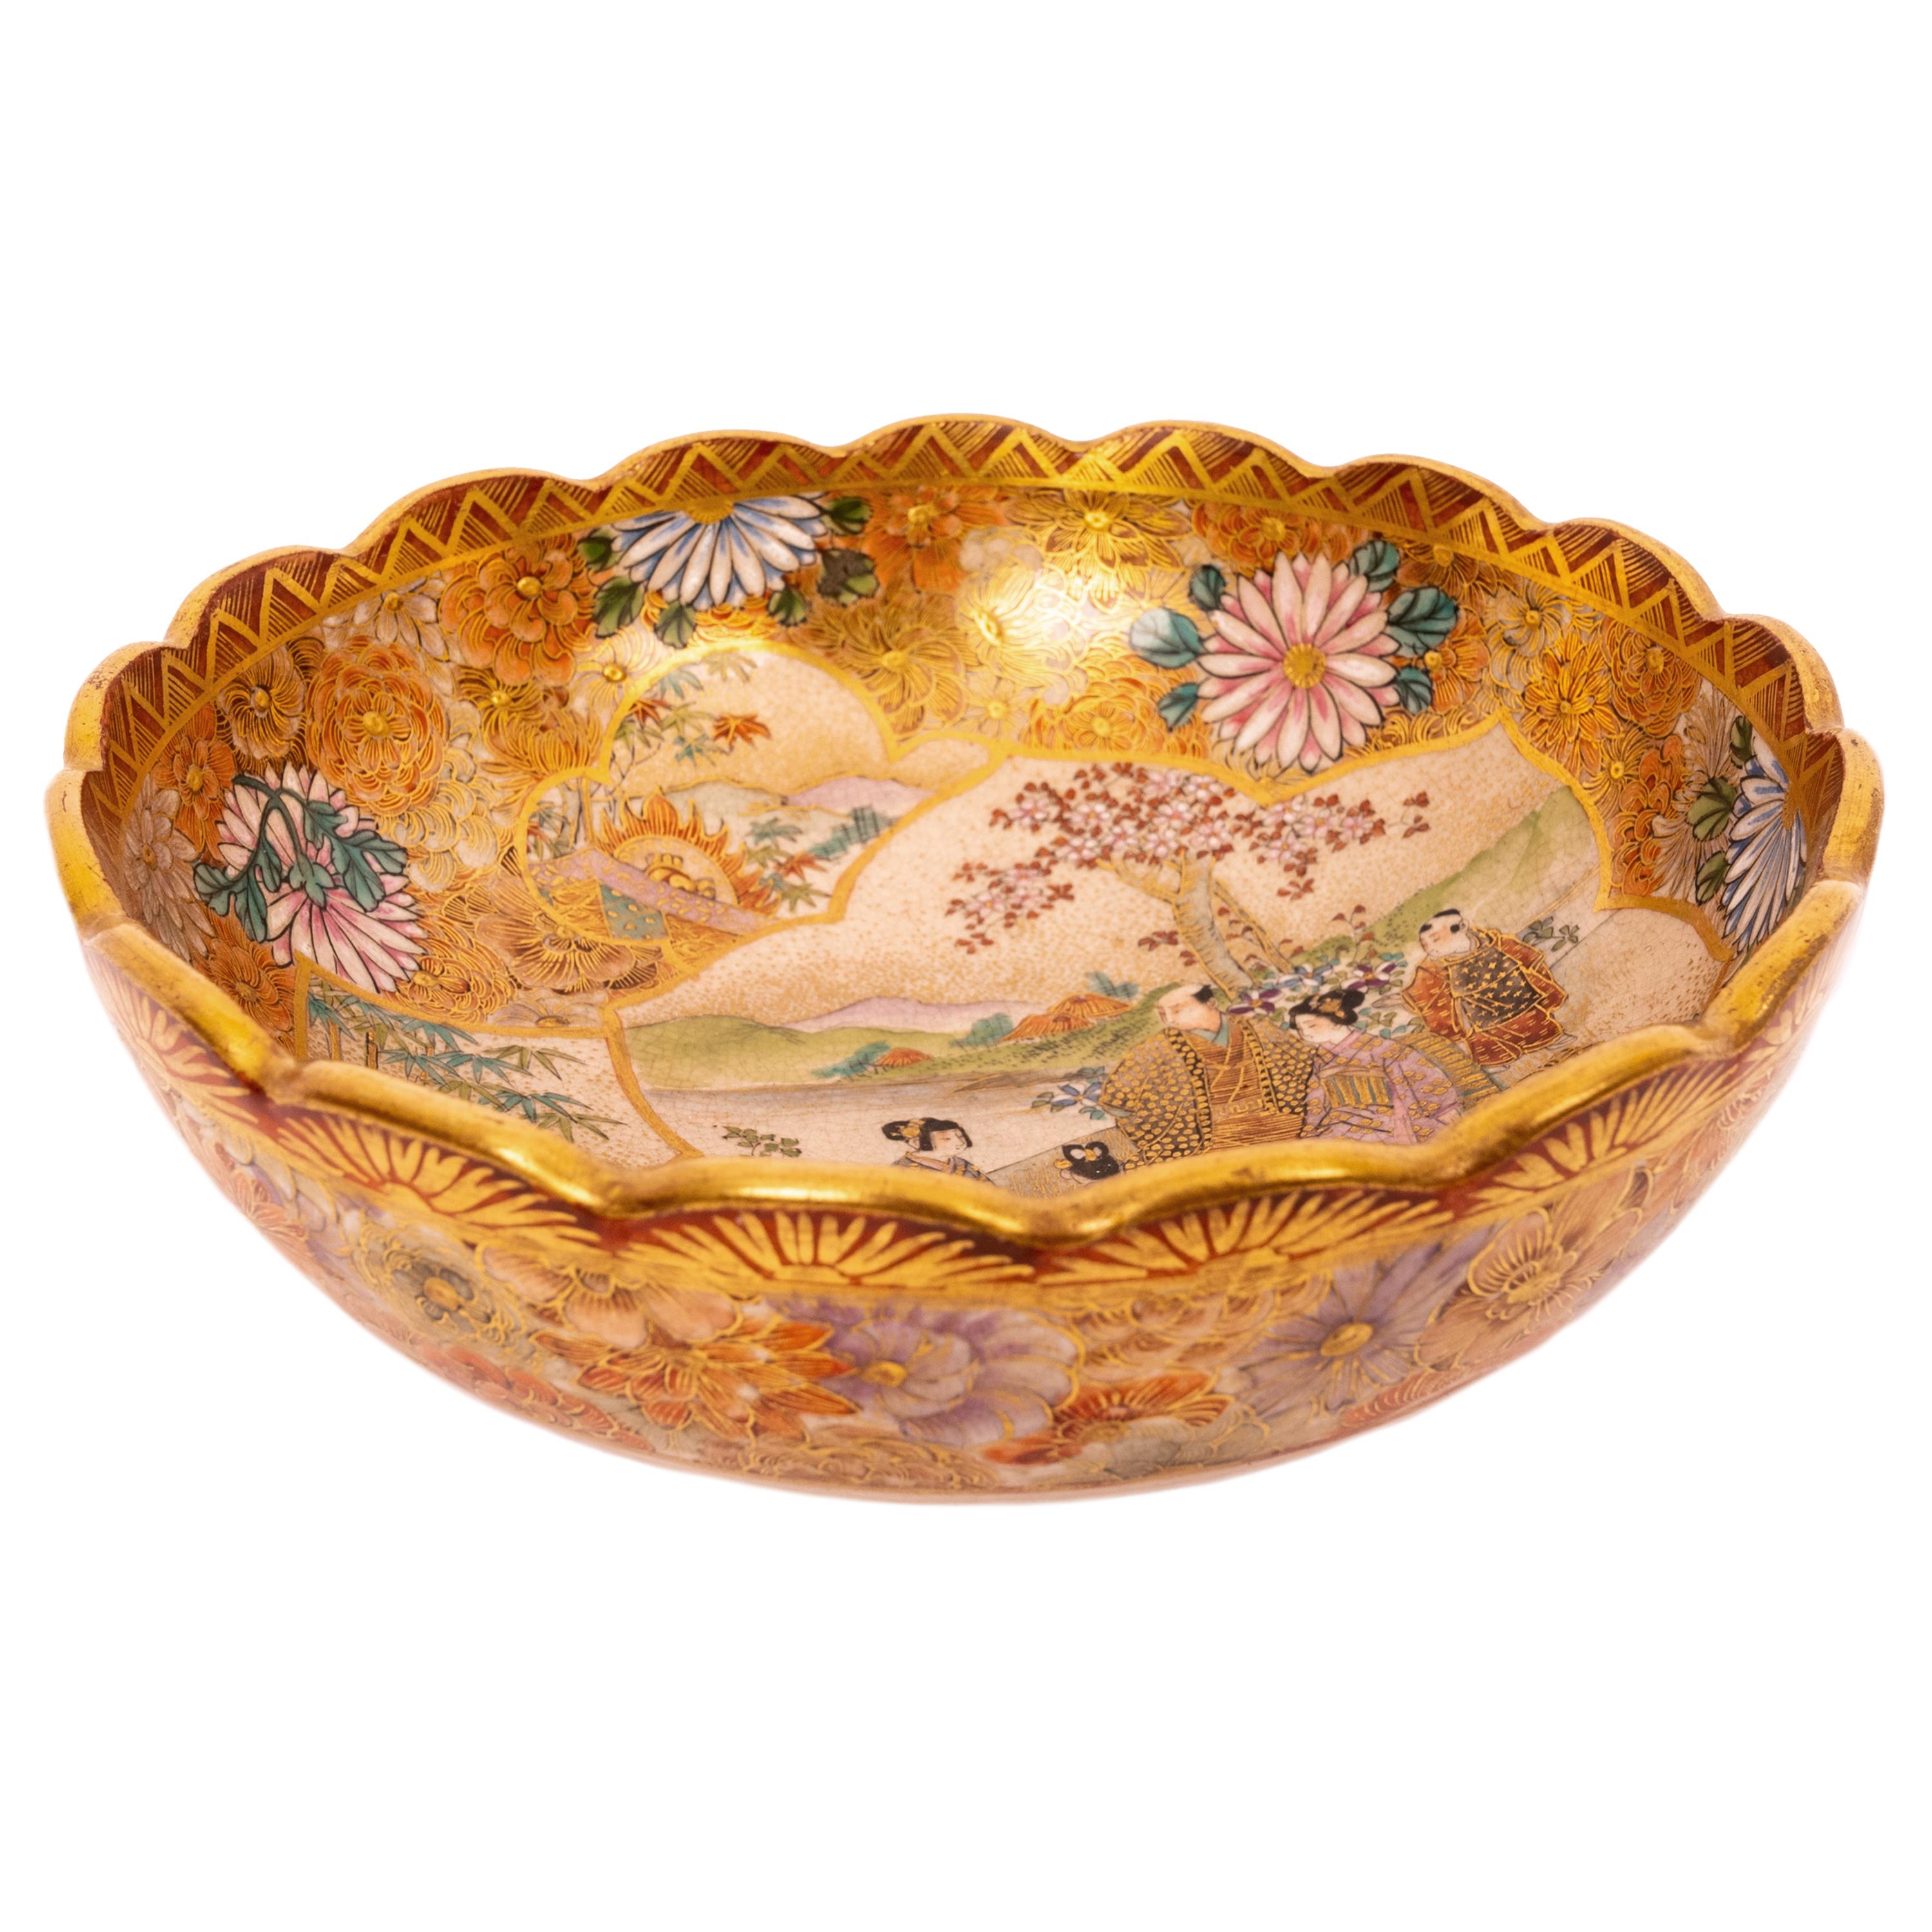 A very fine antique Japanese Meiji period Satsuma pottery bowl, circa 1890.
The bowl having a lobed rim and finely decorated & gilt to the outside with a 'thousand flowers' decoration, the inside of the bowl also with gilded and floral decoration.